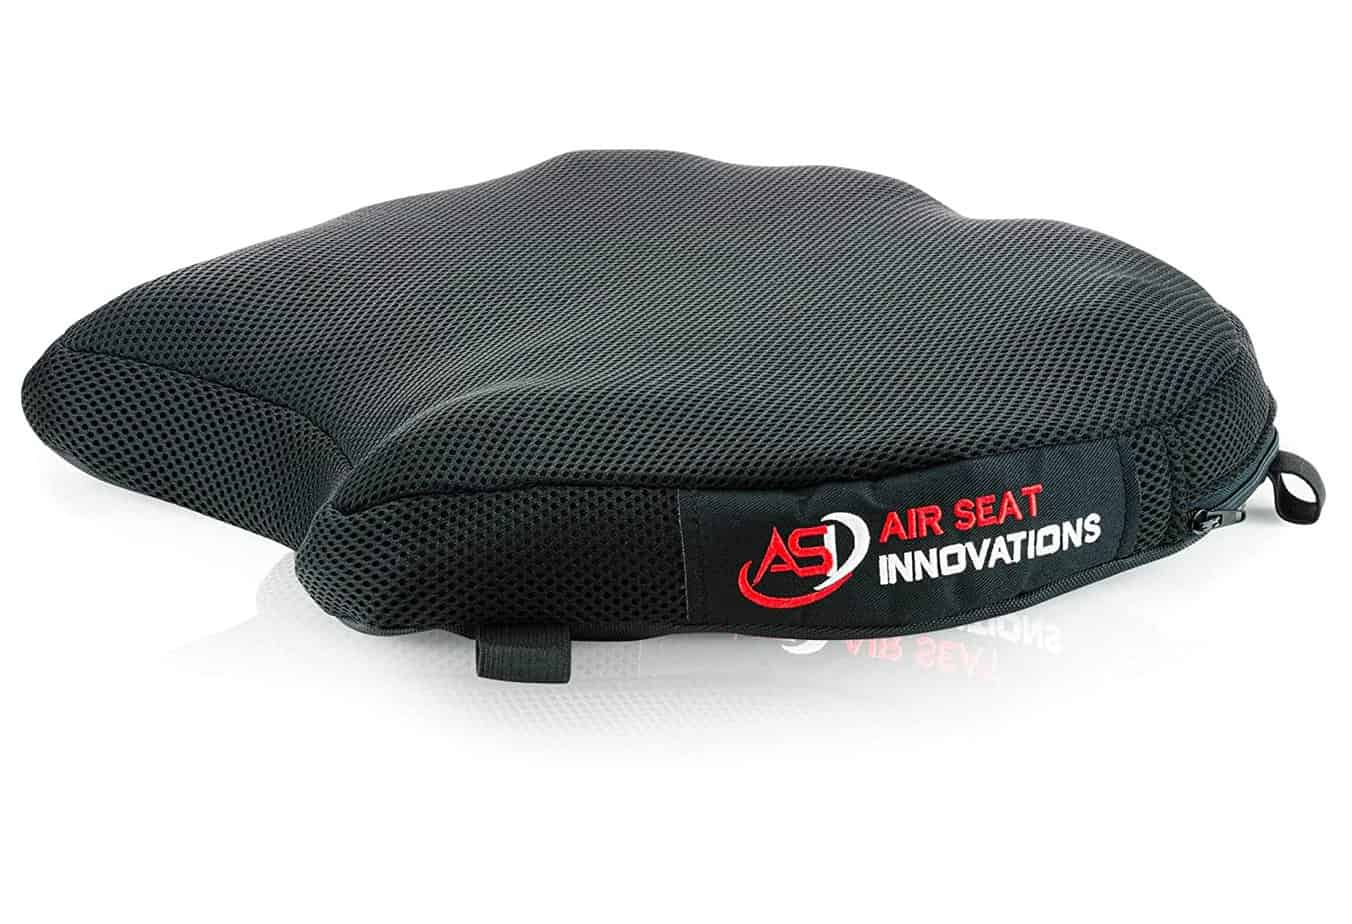 ASI-Motorcycle-Air-Seat-Cushion-Rear-or-Small-Seat-Size